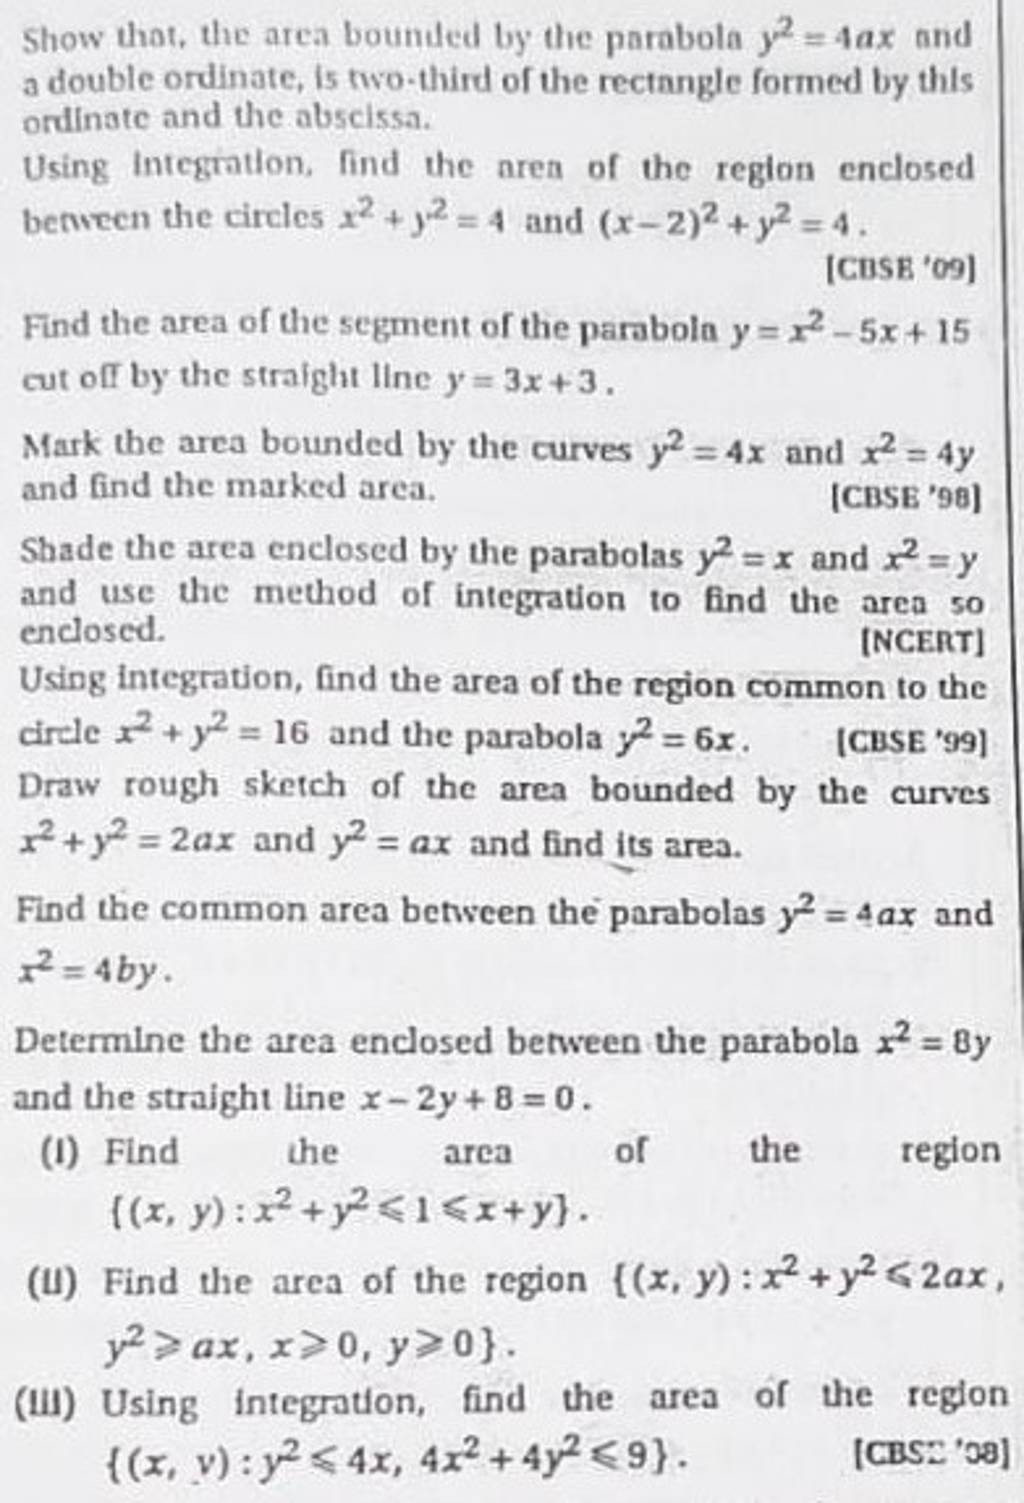 Show that, the area bounded by the parabola y2=4ax and a double ordina